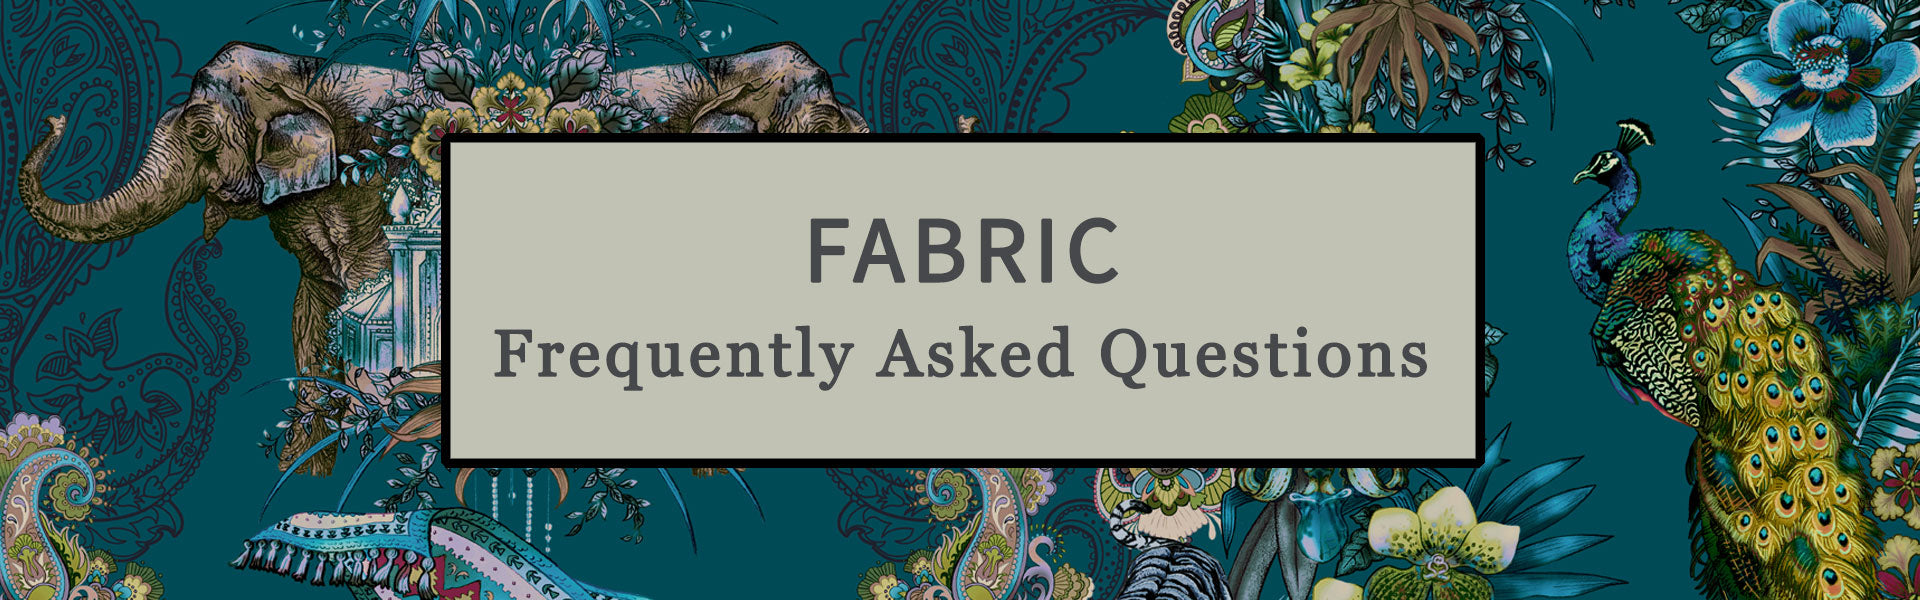 Designer Fabrics Frequently Asked Questions